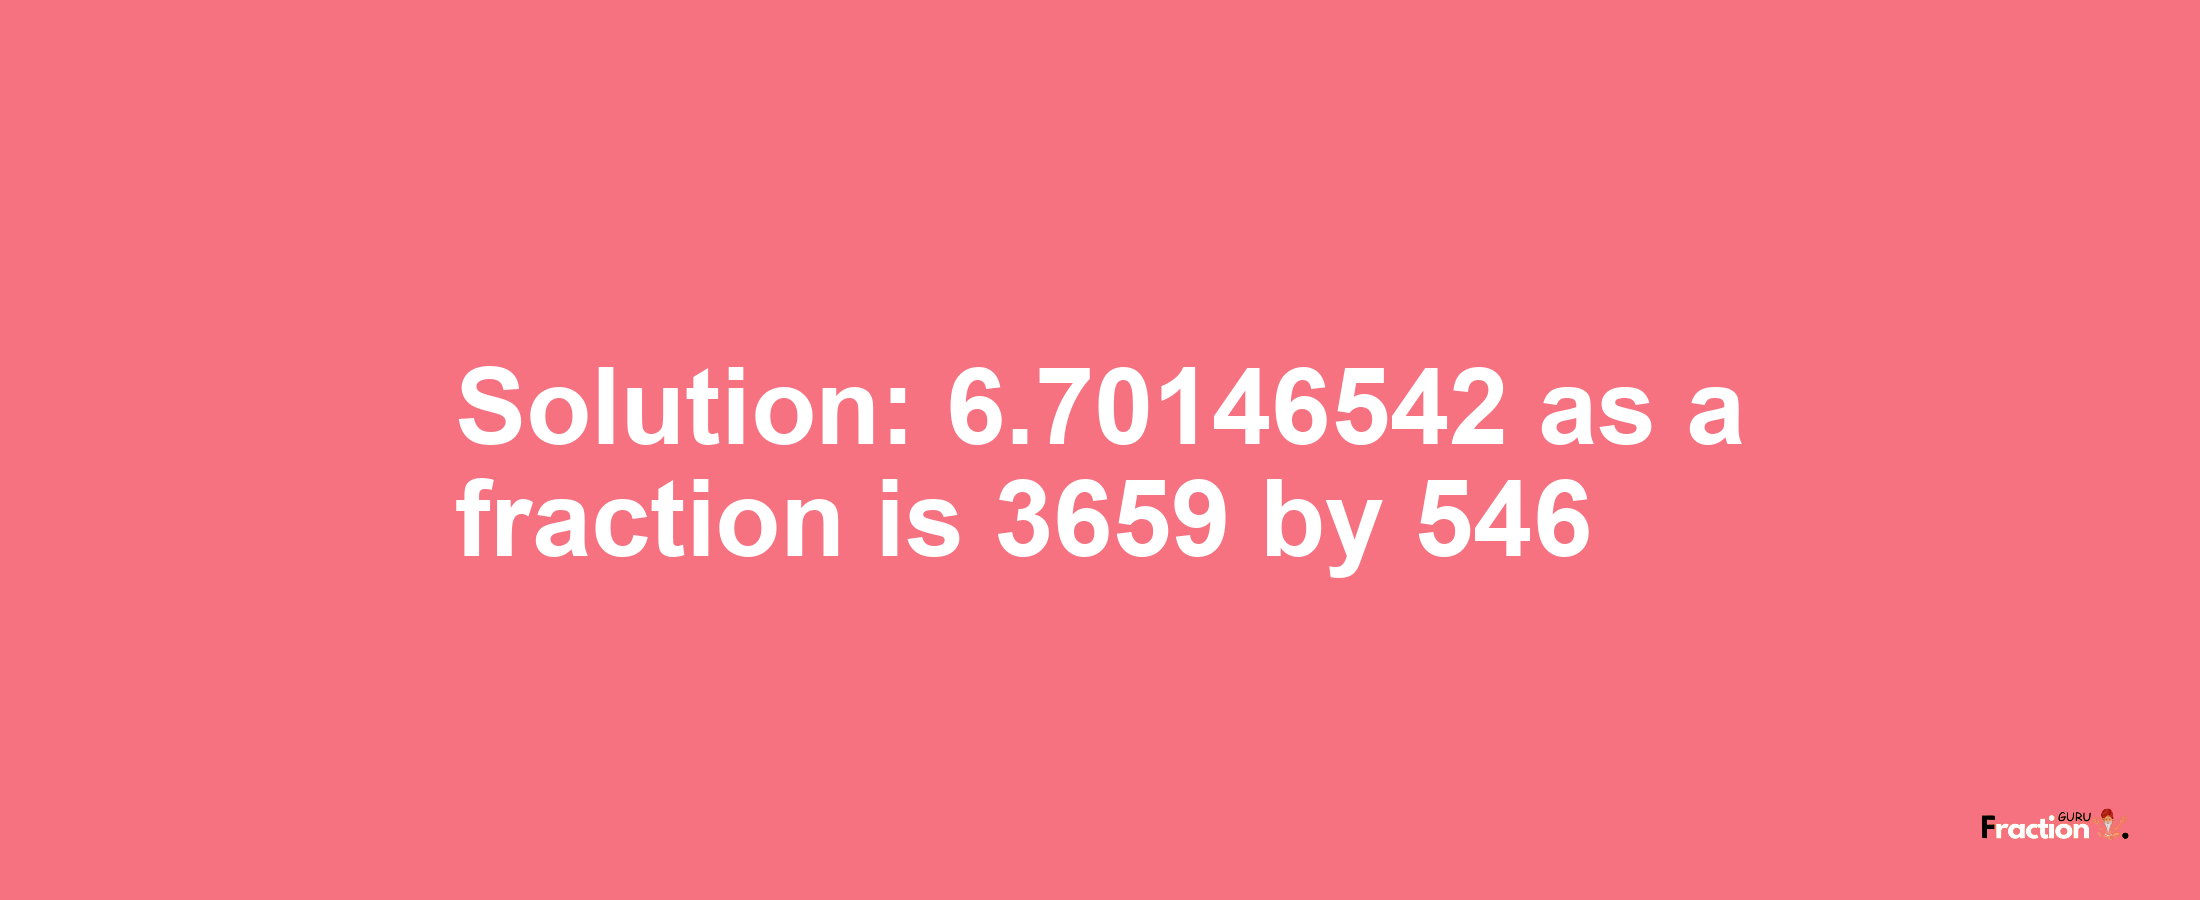 Solution:6.70146542 as a fraction is 3659/546